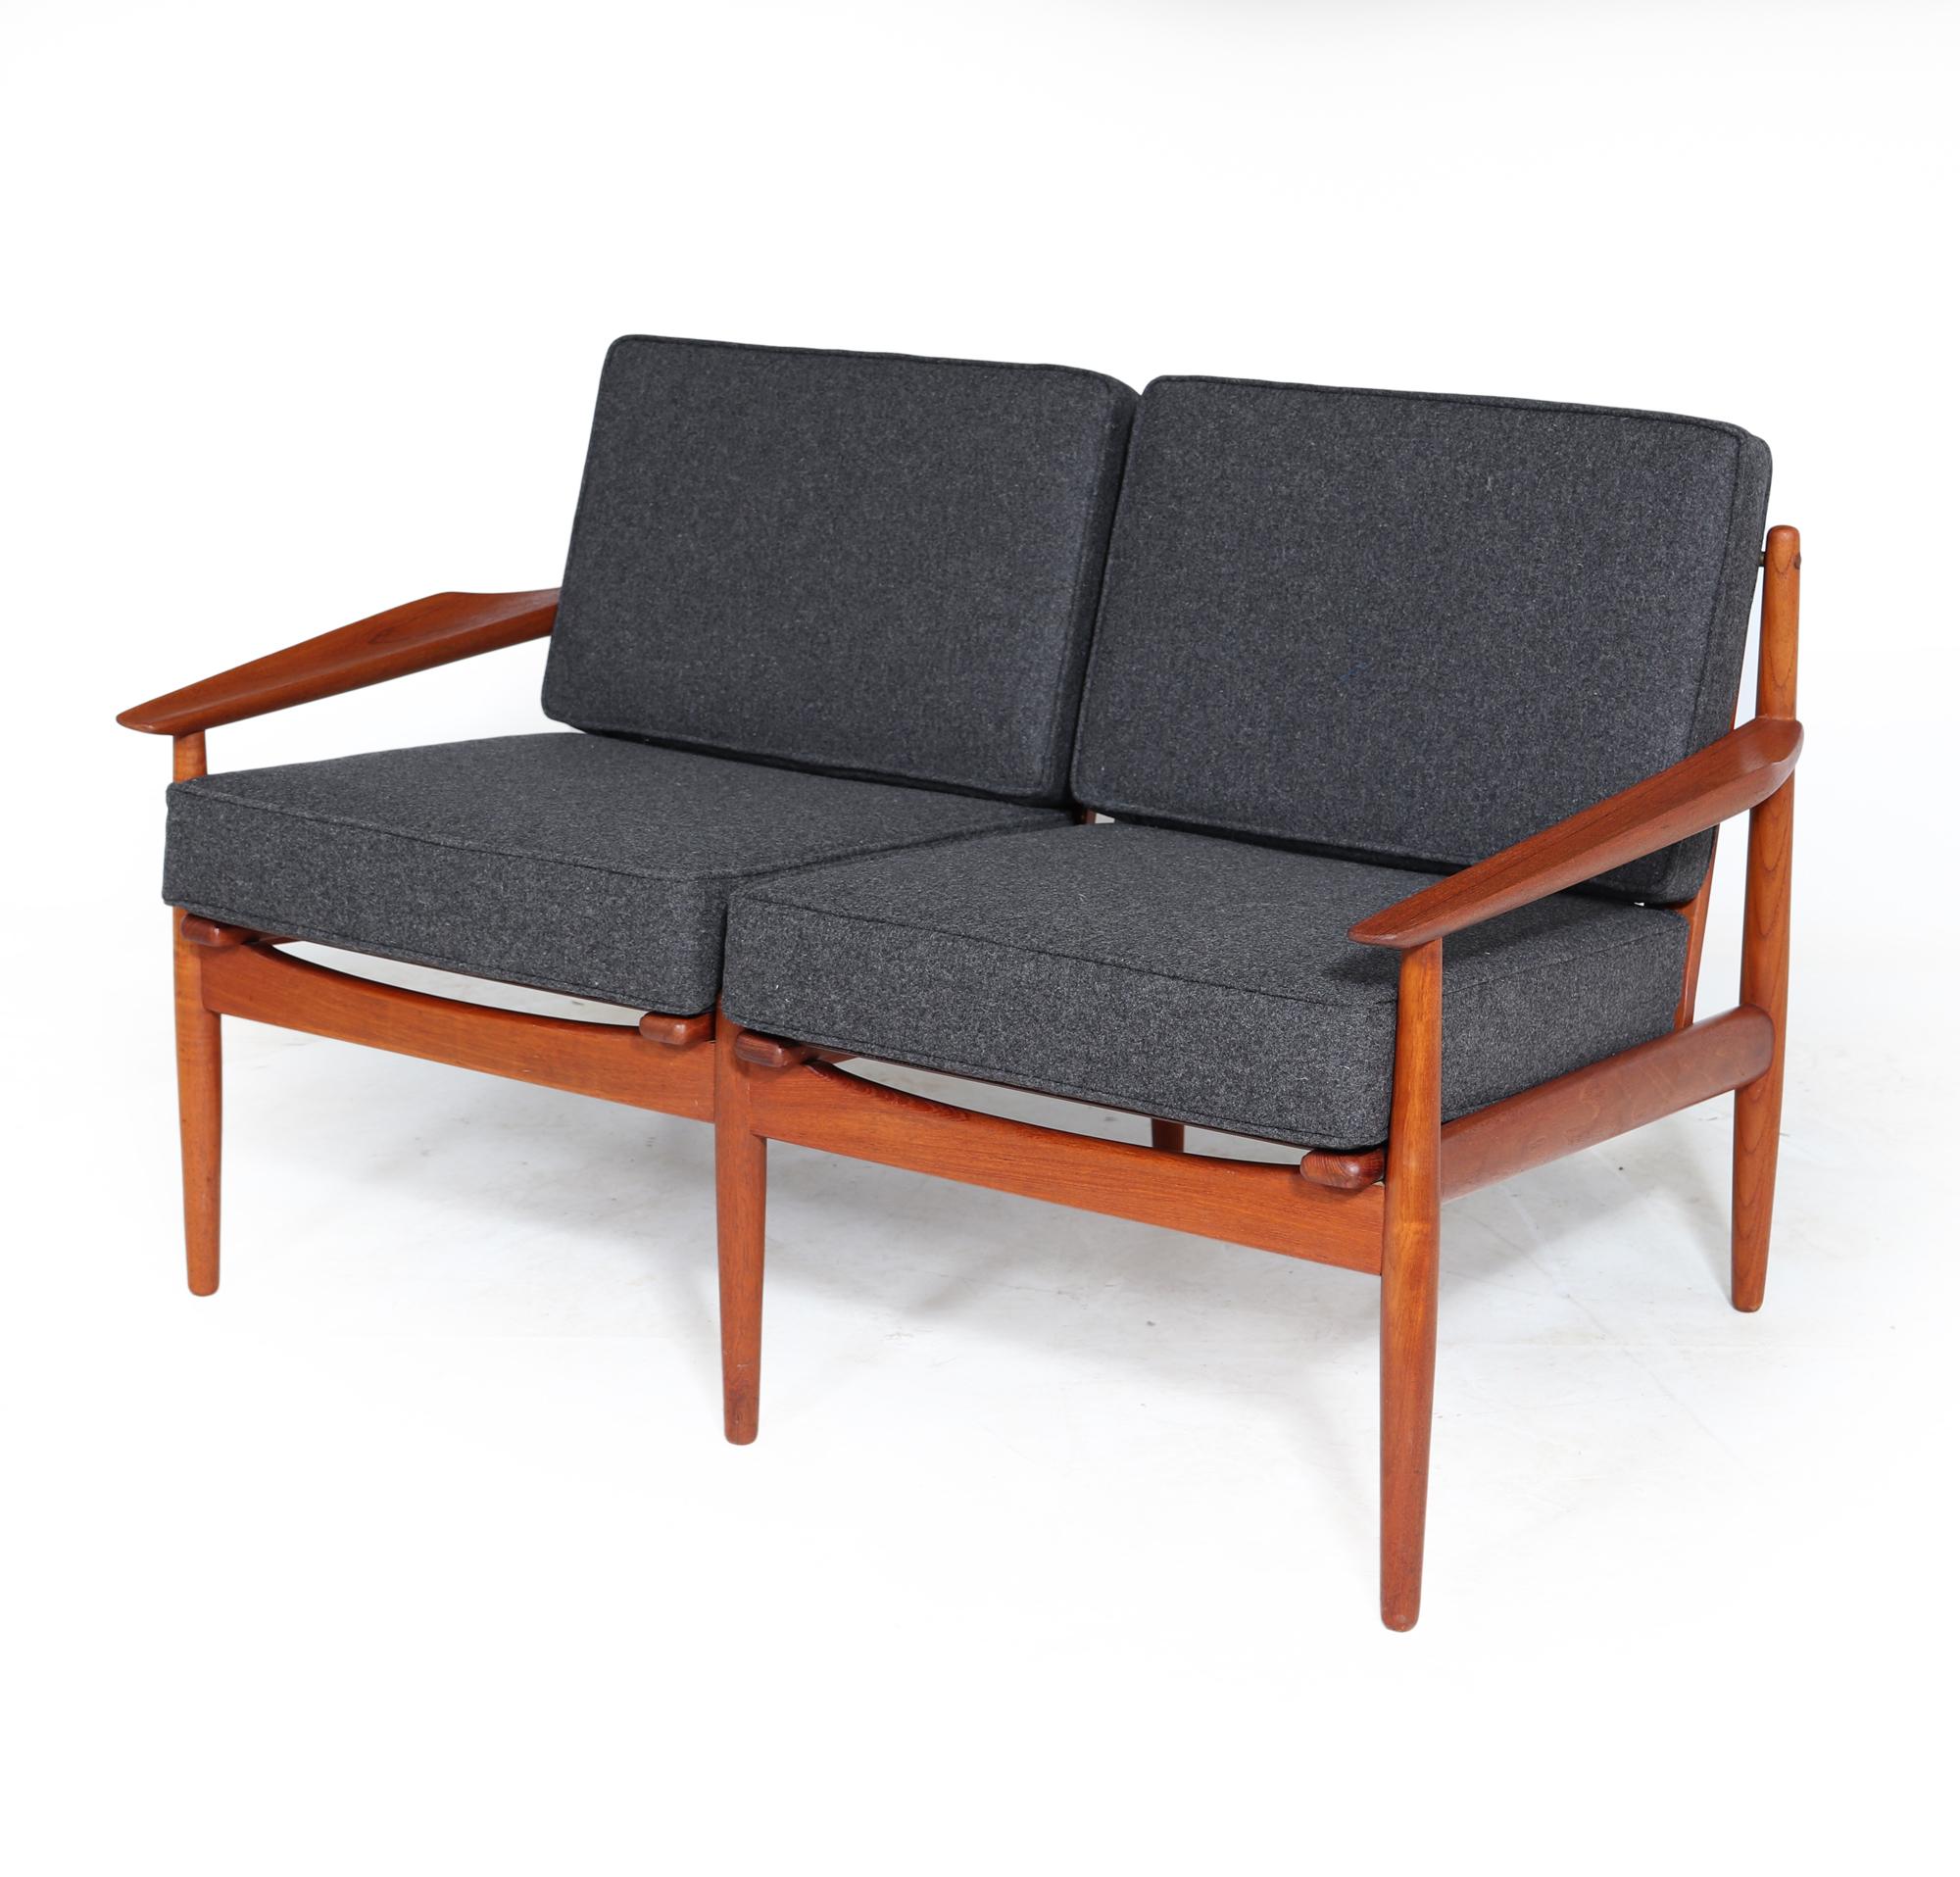 An early midcentury teak framed sofa designed by Arne Vodder and produced by Glostrup in the 1950s in Denmark, the Sofa have beautifully shaped and sculpted teak armrests and solid teak framework with wire sprung seat and back, The sofa has been